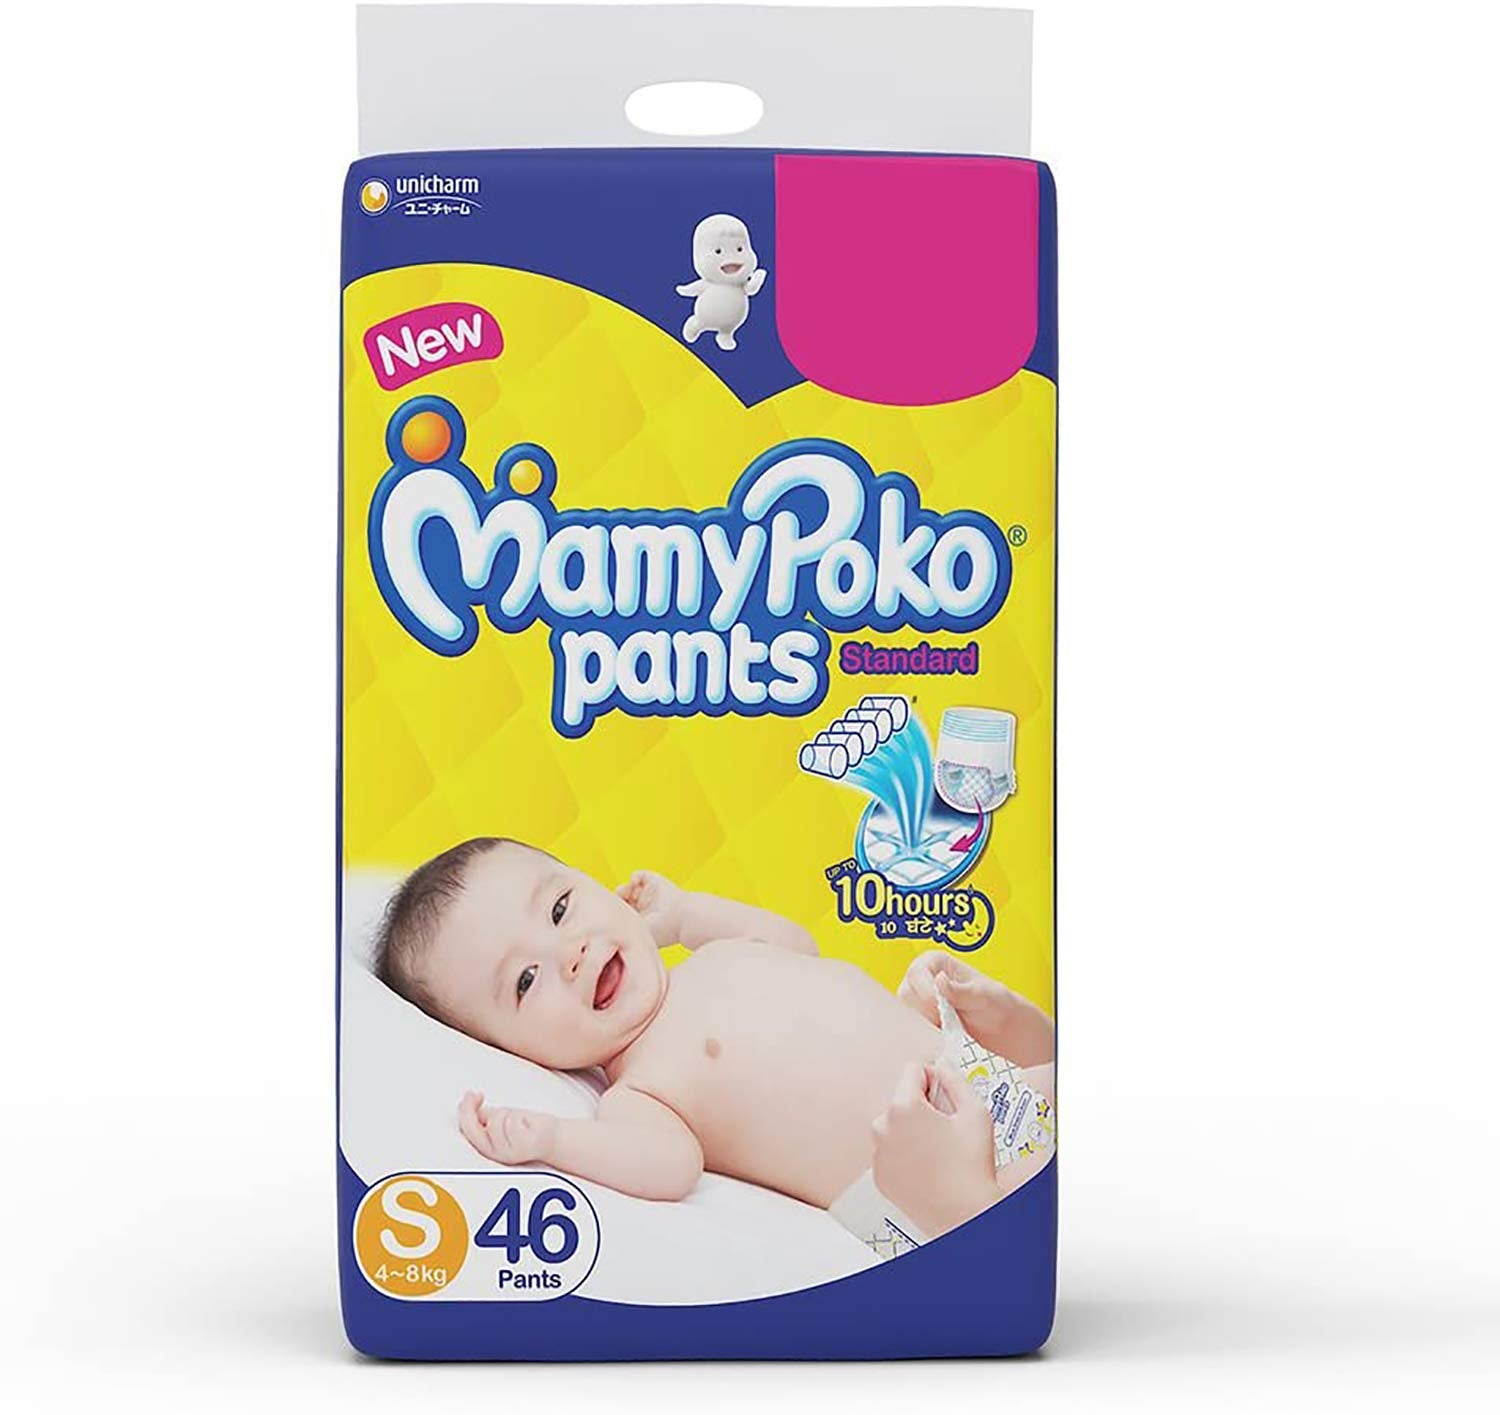 Mamypoko Diaper Pants Standard Style, Size Small, 4-8 Kg (46 Counts), Pack of 3